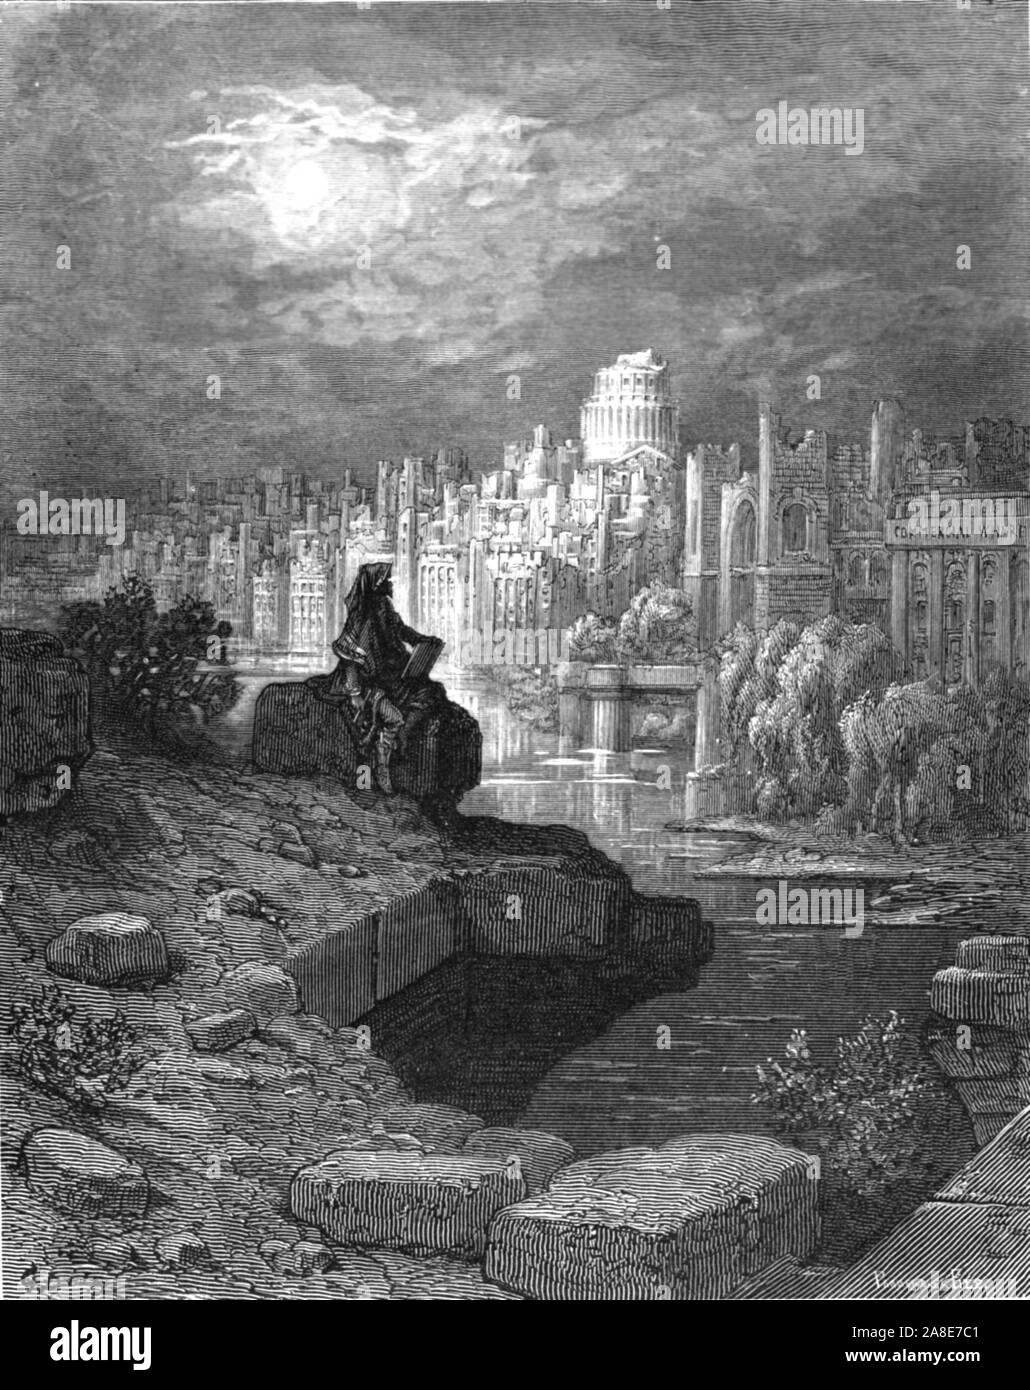 'The New Zealander', 1872. A figure sits on the banks of the River Thames contemplating the downfall of the city. From, &quot;LONDON. A Pilgrimage&quot; by Gustave Dore and Blanchard Jerrold. [Grant and Co., 72-78, Turnmill Street, E.C., 1872]. Stock Photo